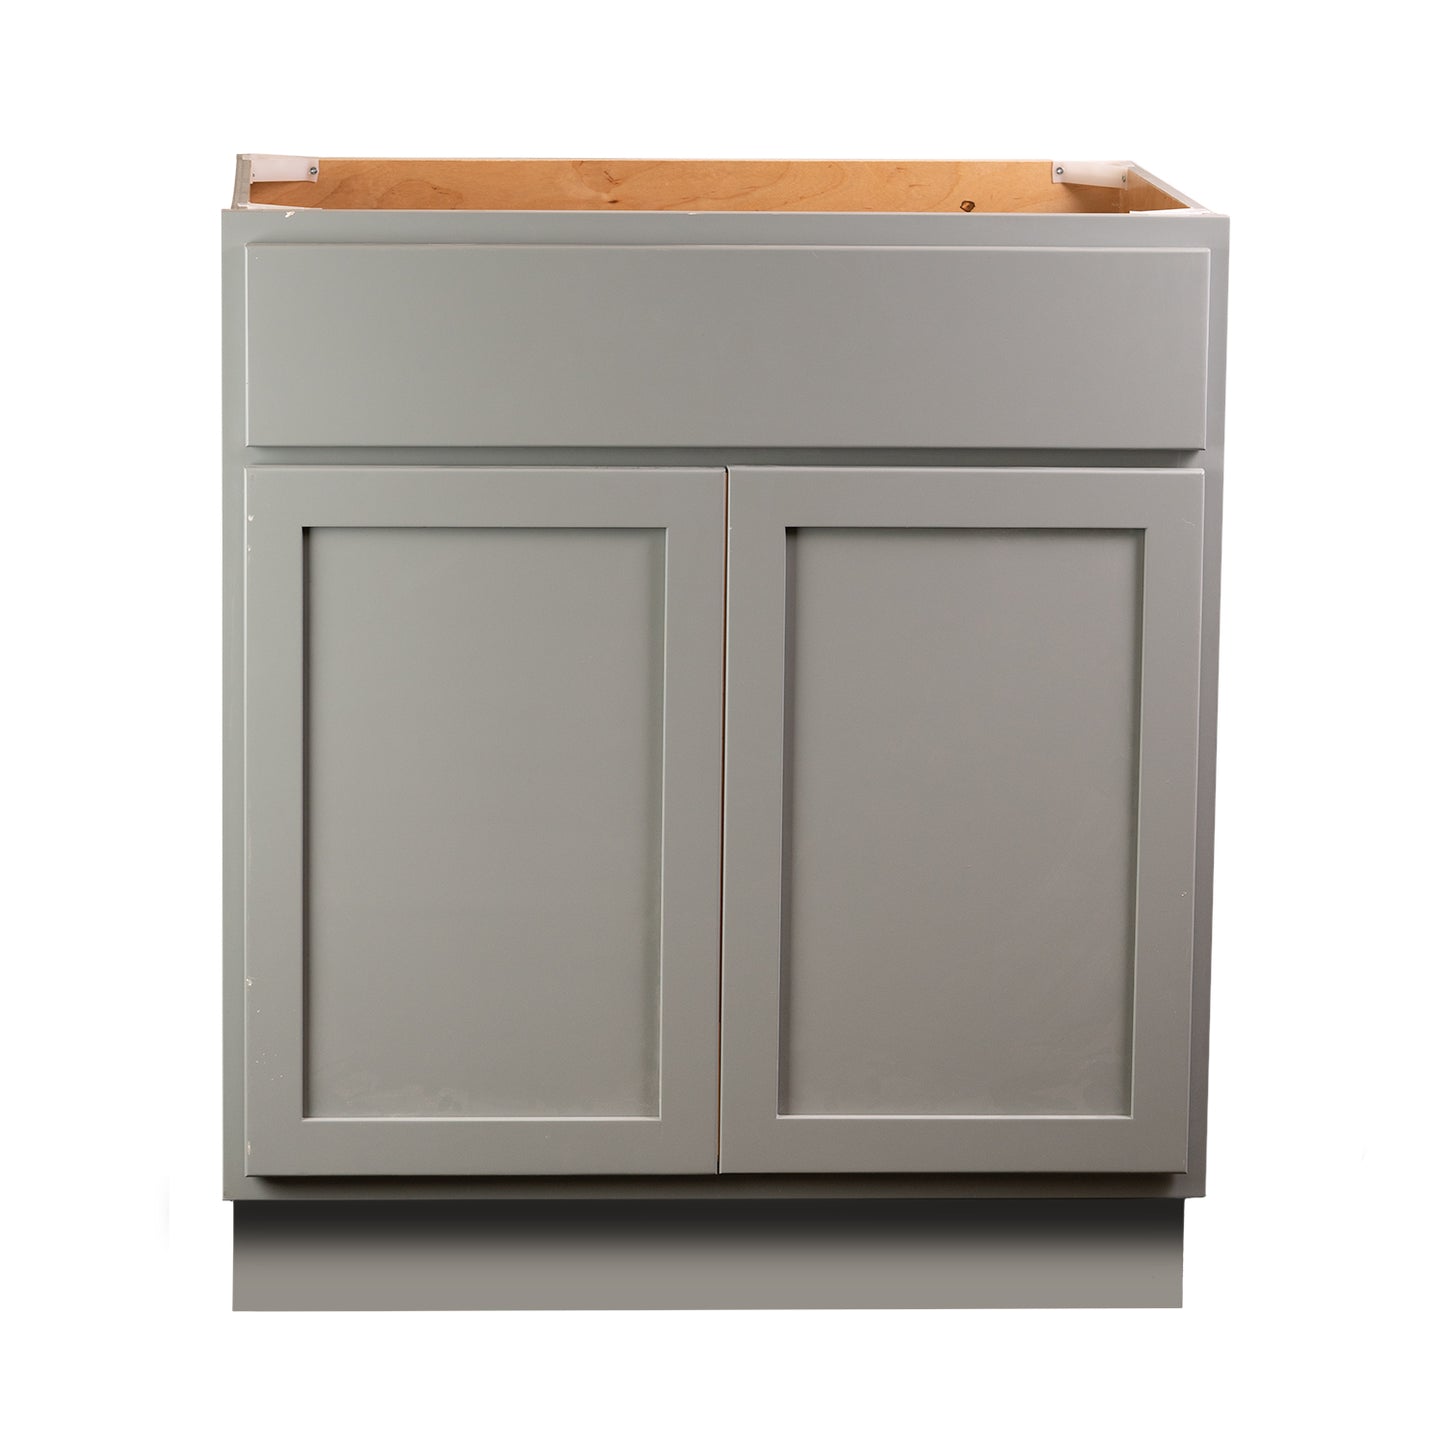 Quicklock RTA (Ready-to-Assemble) Magnetic Grey Vanity Base Cabinet | 36"Wx34.5"Hx18"D